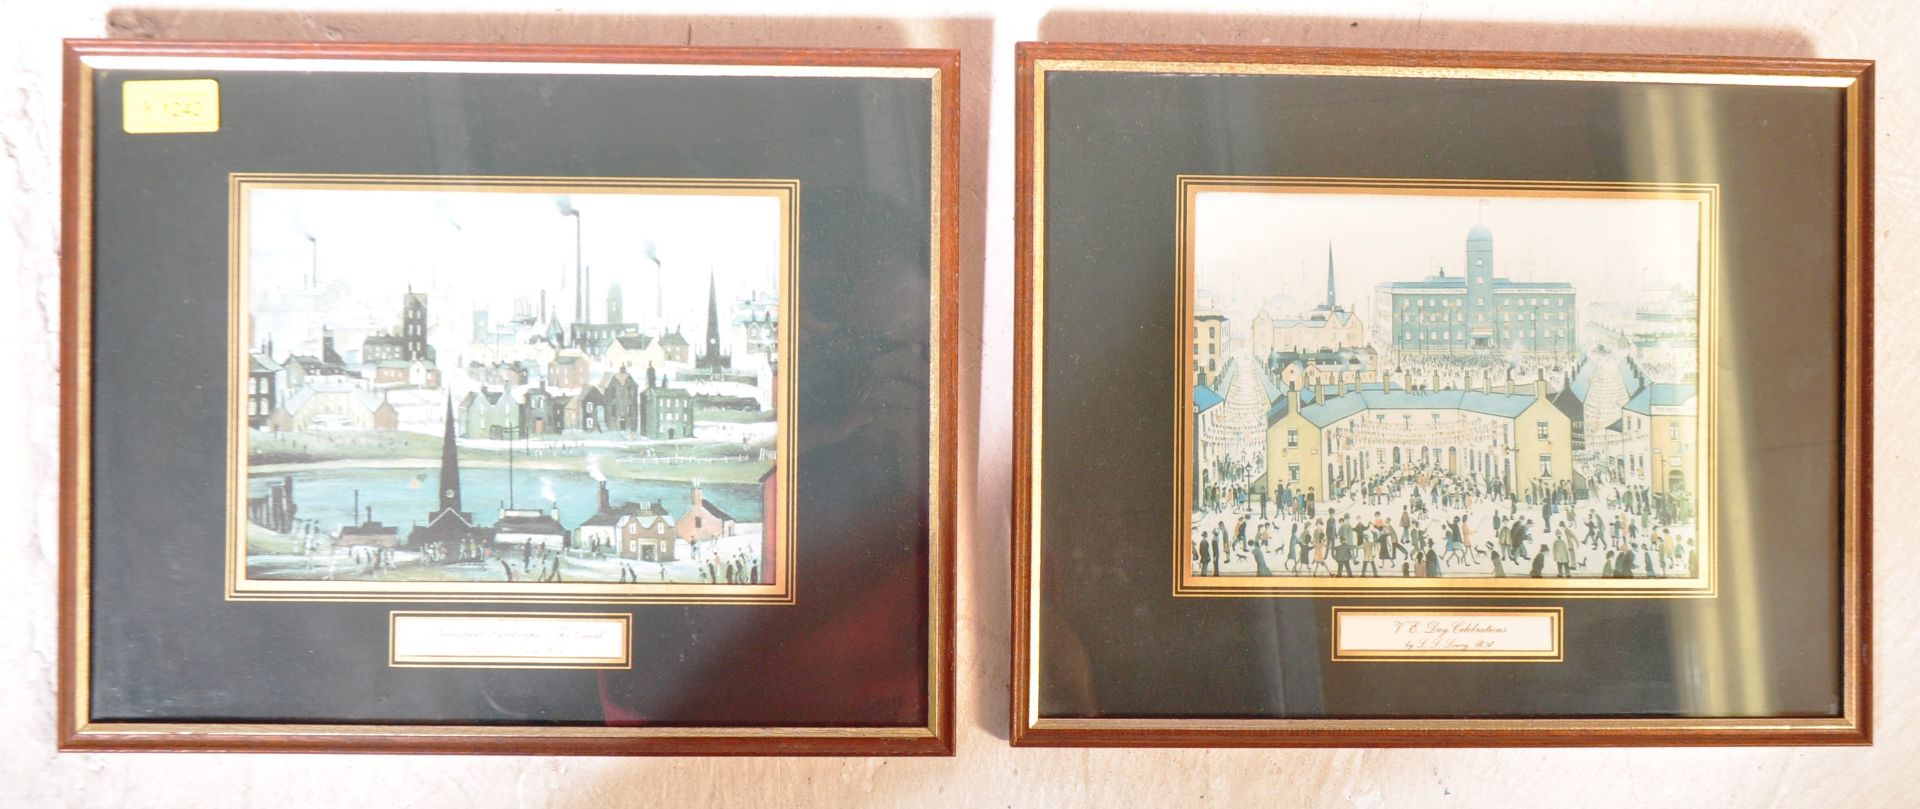 LAURENCE STEPHEN LOWRY - A PAIR OF PRINTS